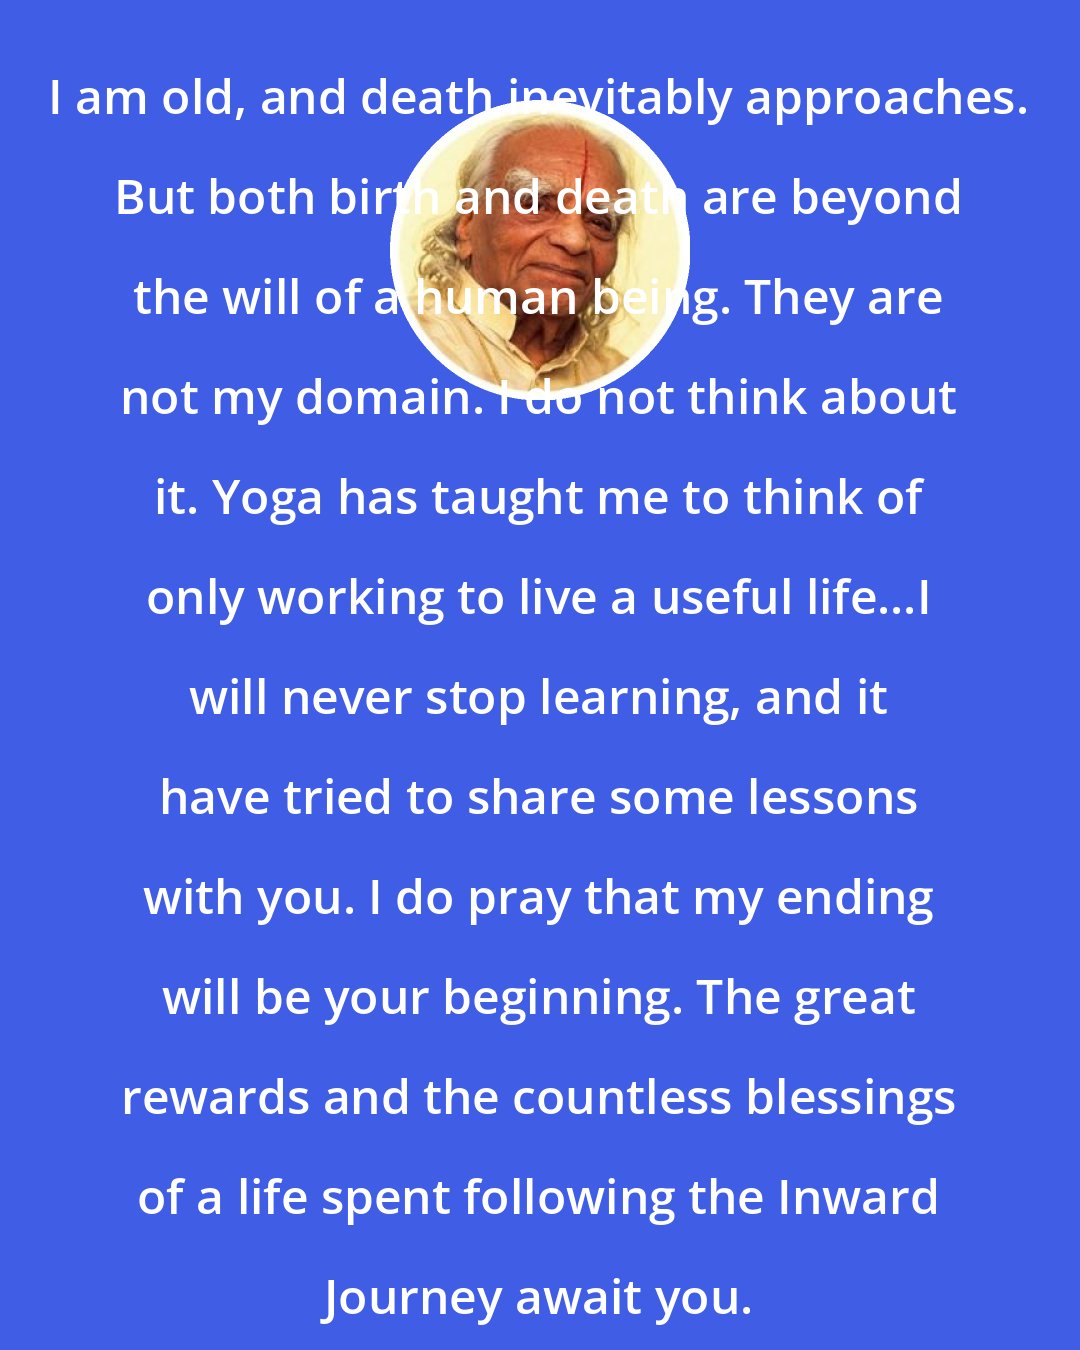 B.K.S. Iyengar: I am old, and death inevitably approaches. But both birth and death are beyond the will of a human being. They are not my domain. I do not think about it. Yoga has taught me to think of only working to live a useful life...I will never stop learning, and it have tried to share some lessons with you. I do pray that my ending will be your beginning. The great rewards and the countless blessings of a life spent following the Inward Journey await you.